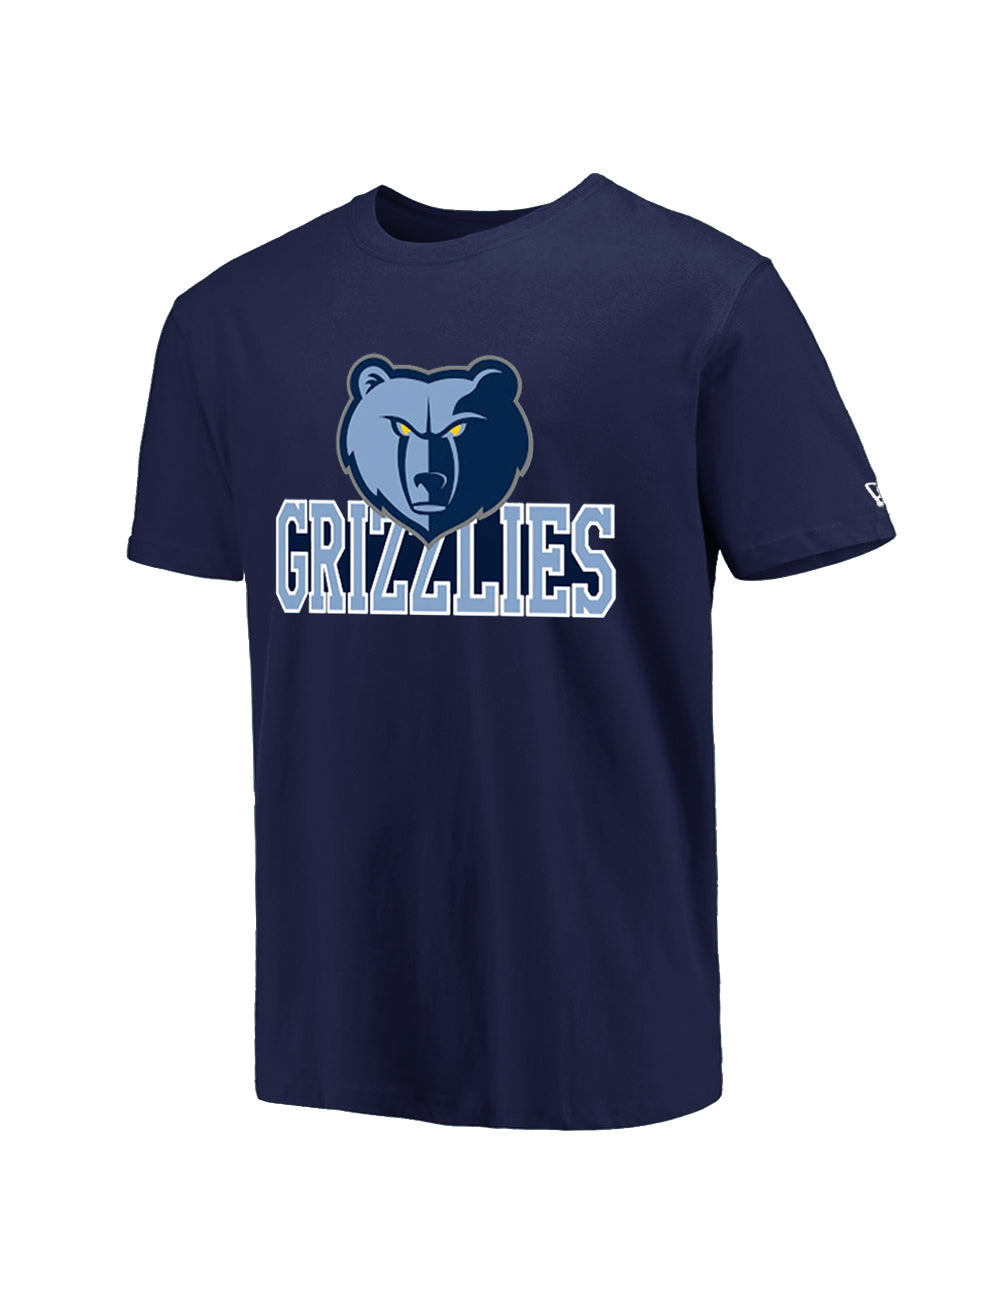 Nike, Shirts, Authentic Brand New Blank Nba Basketball Memphis Grizzlies  Jersey